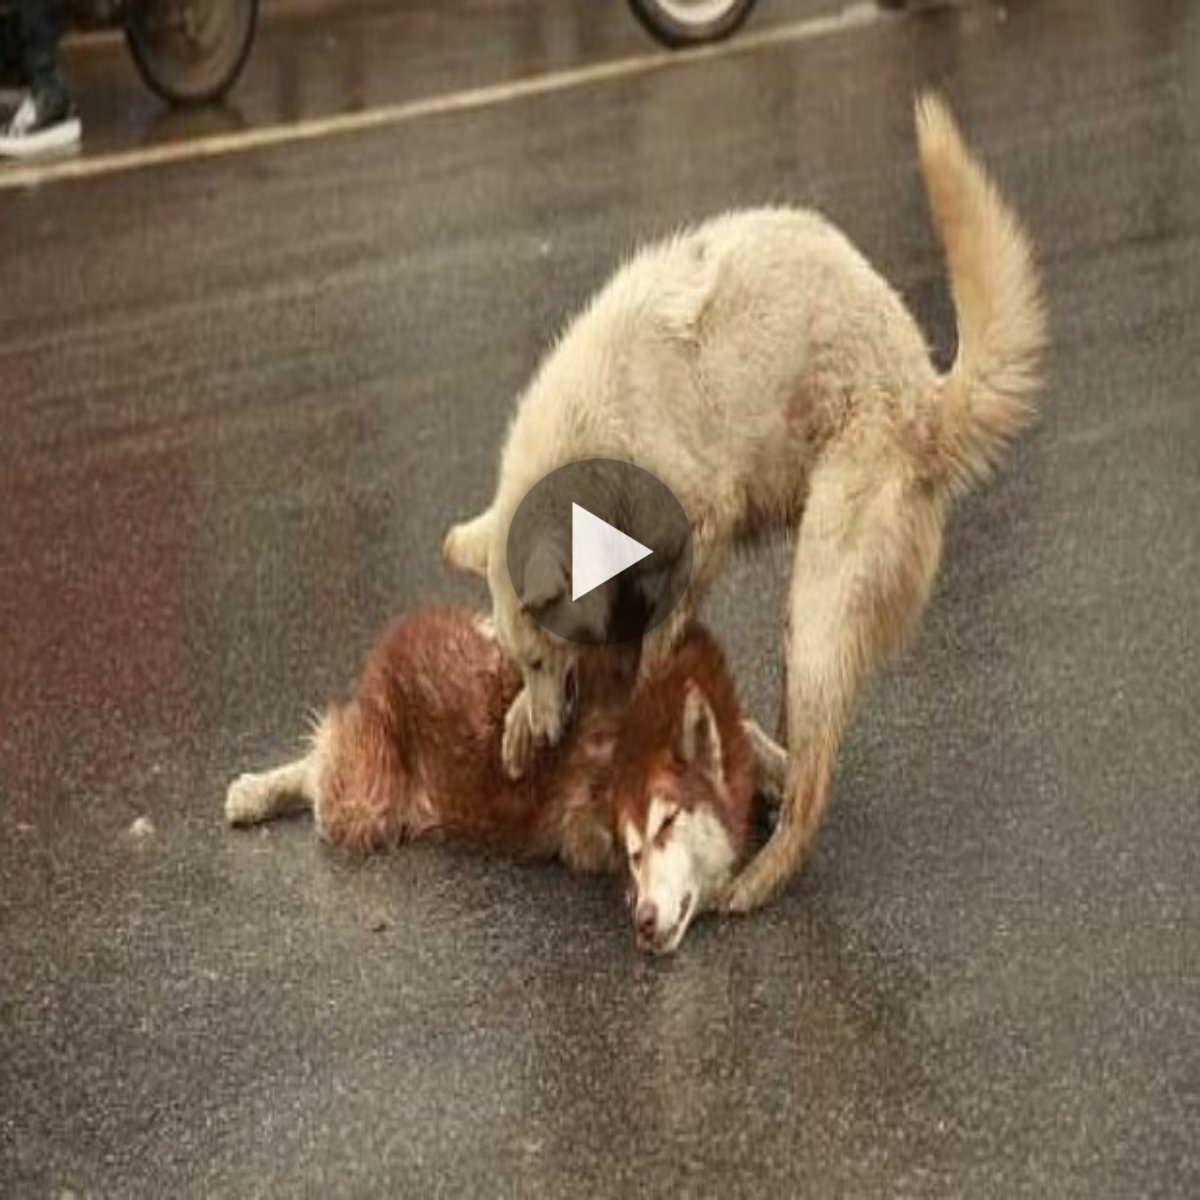 Loyal dog stays by his dying friend’s side, crying and trying to wake up his friend after an accident, touching the hearts of passersby.